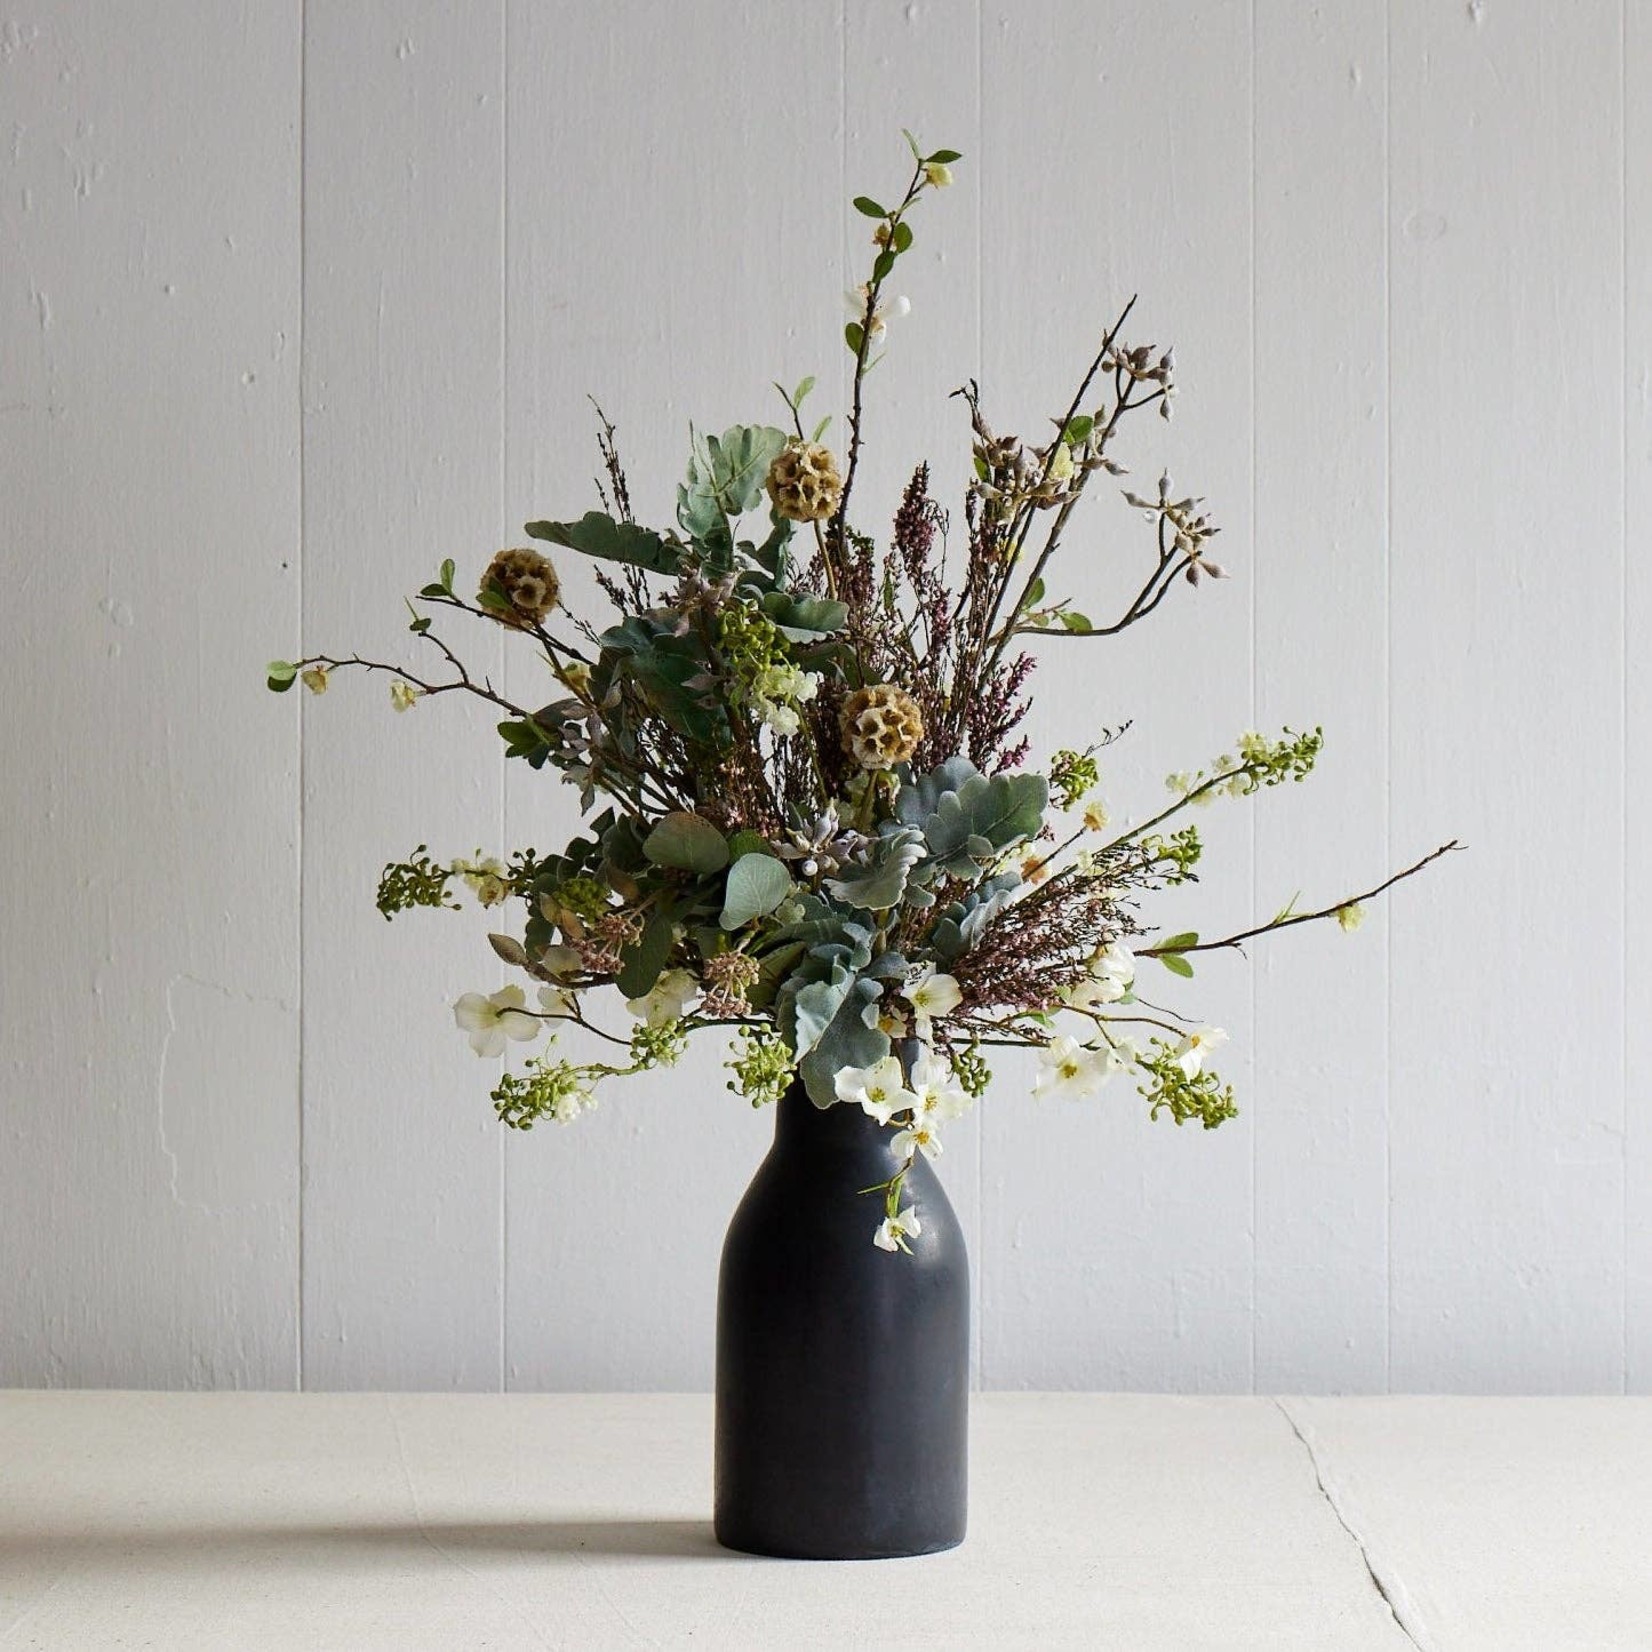 Fauxquet: A Timeless Alternative To Conventional Flowers.